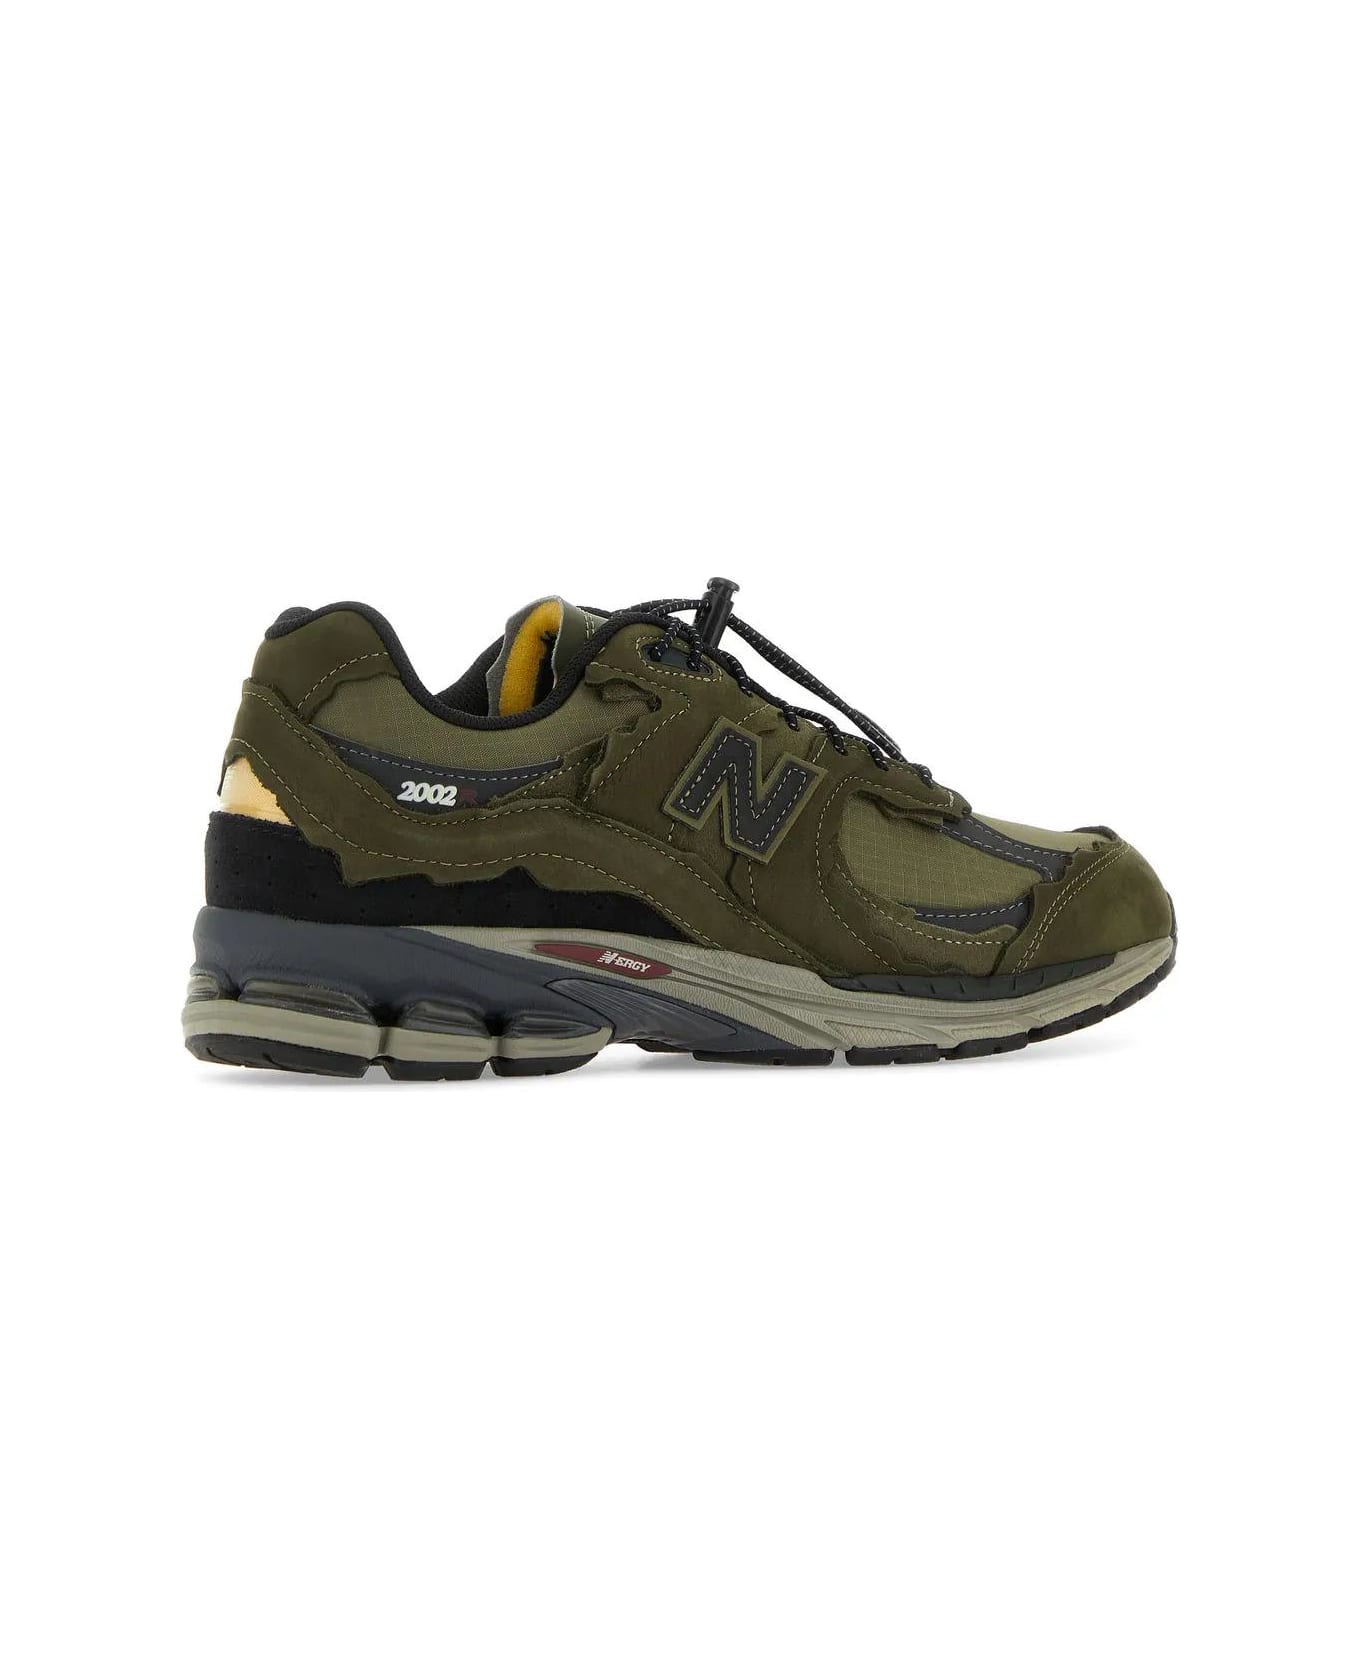 New Balance Multicolor Suede And Fabric 2002r Sneakers - Camouflage